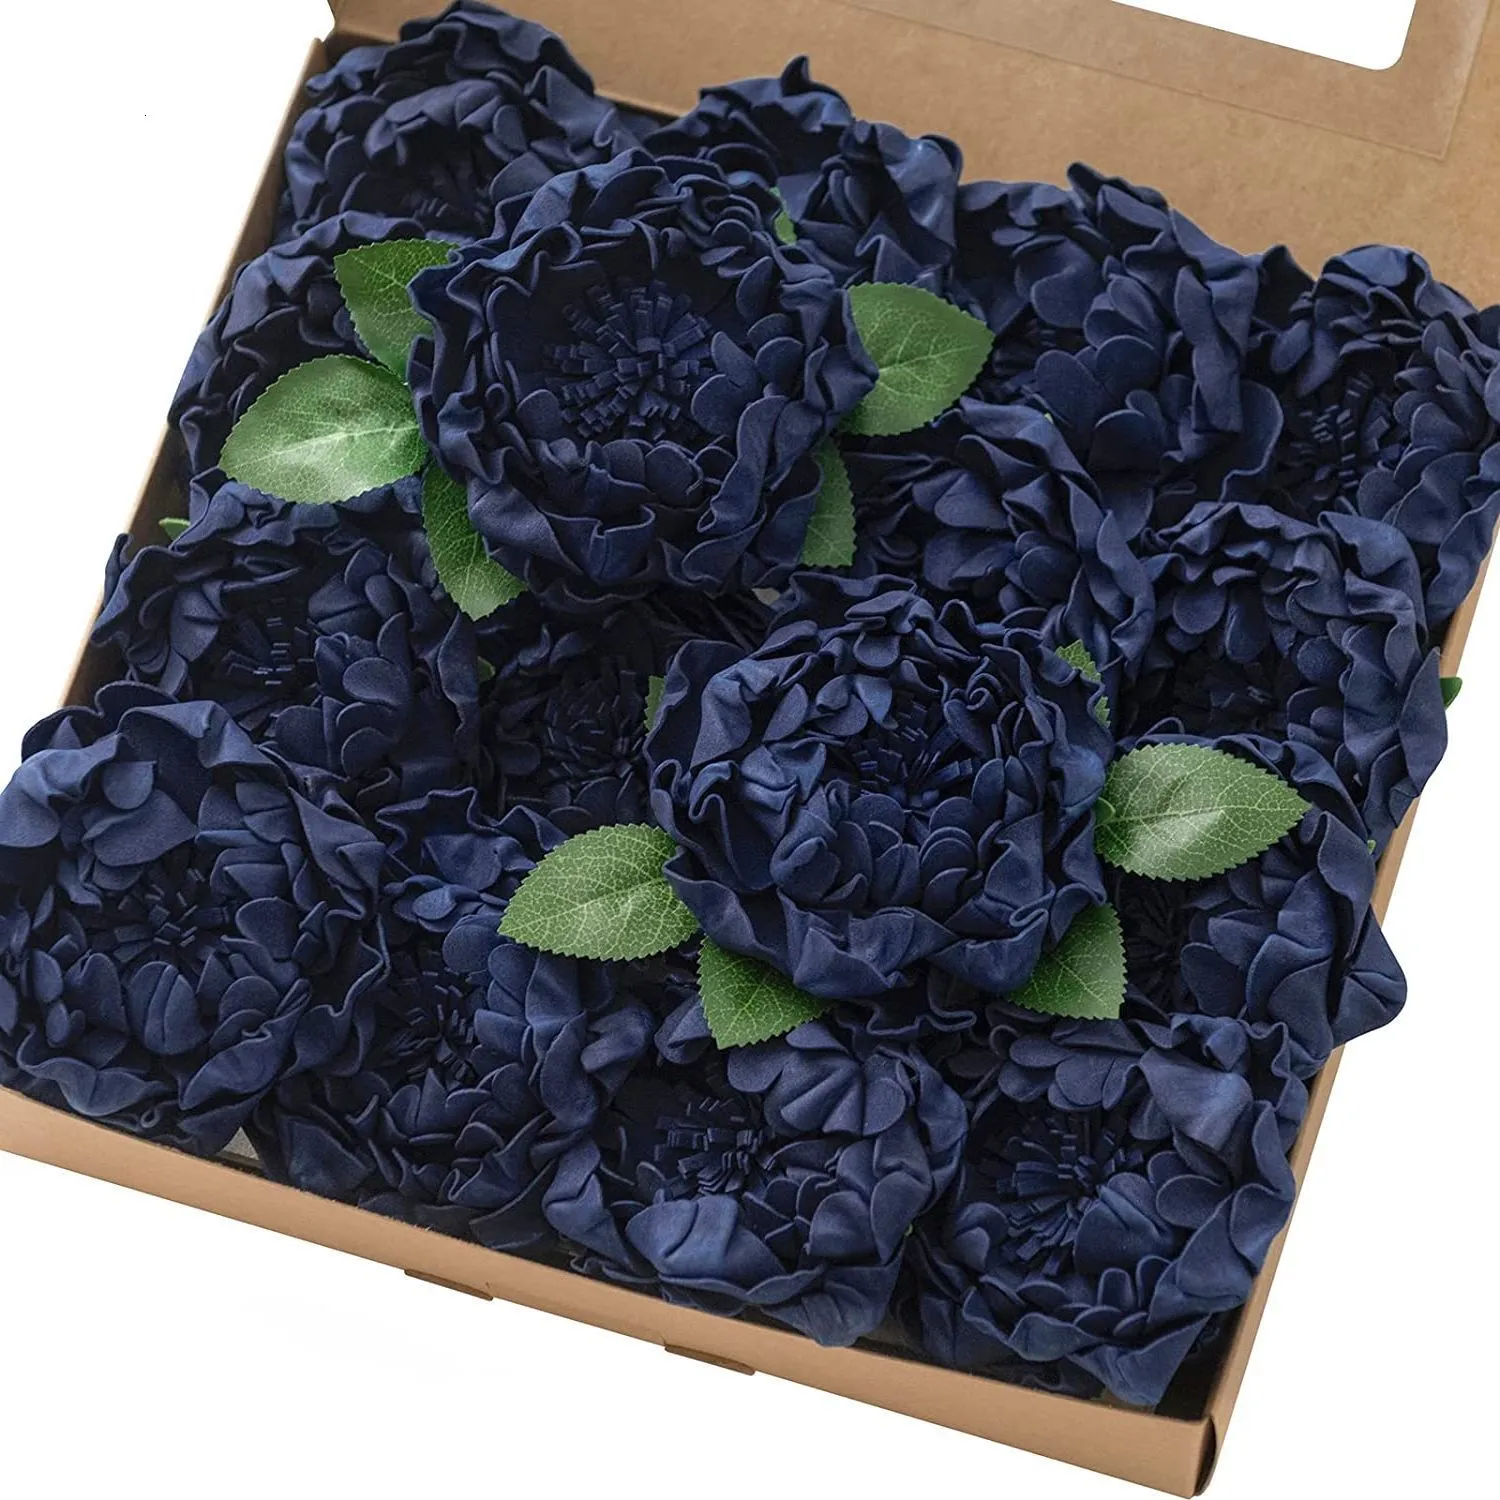 Decorative Flowers Wreaths Mefier Artificial Flower Fake Peony 16/32pcs Navy Blue Blooming Peonies w/Stem for DIY Wedding Bouquet Home Decorations 230812